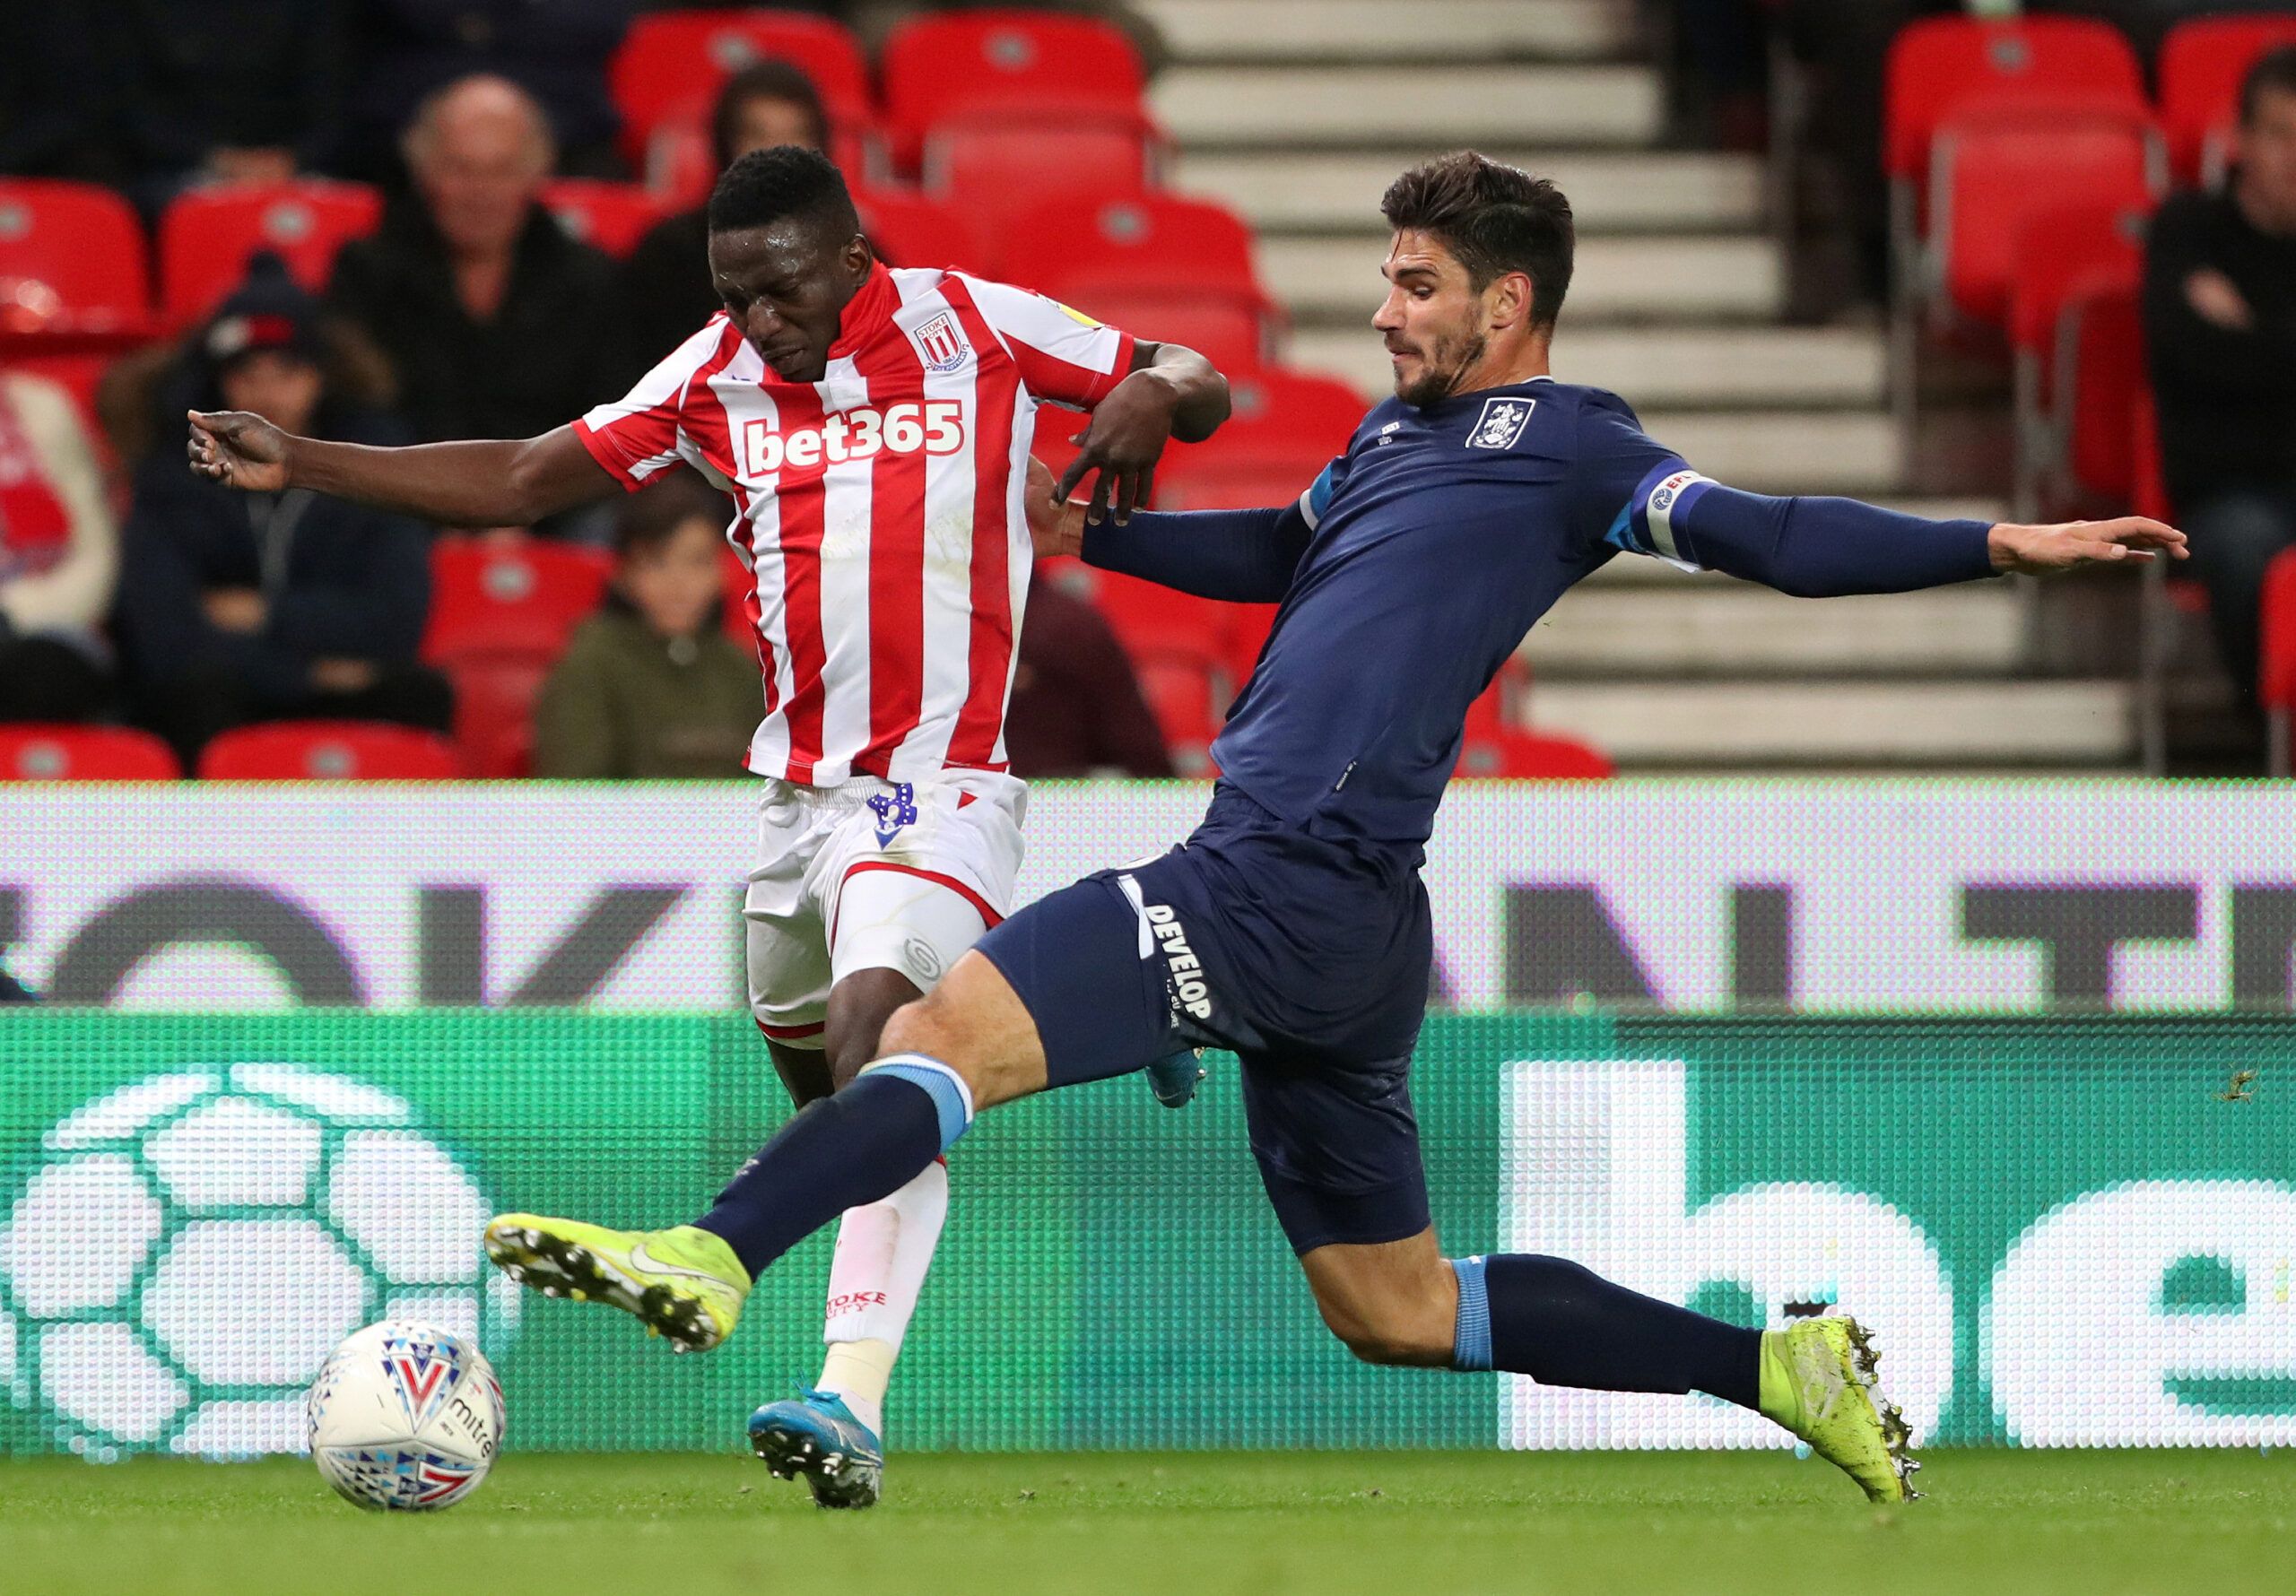 Soccer Football - Championship - Stoke City v Huddersfield Town - bet365 Stadium, Stoke-on-Trent, Britain - October 1, 2019   Huddersfield Town's Jonathan Hogg in action with Stoke City's Peter Etebo   Action Images/Molly Darlington    EDITORIAL USE ONLY. No use with unauthorized audio, video, data, fixture lists, club/league logos or 